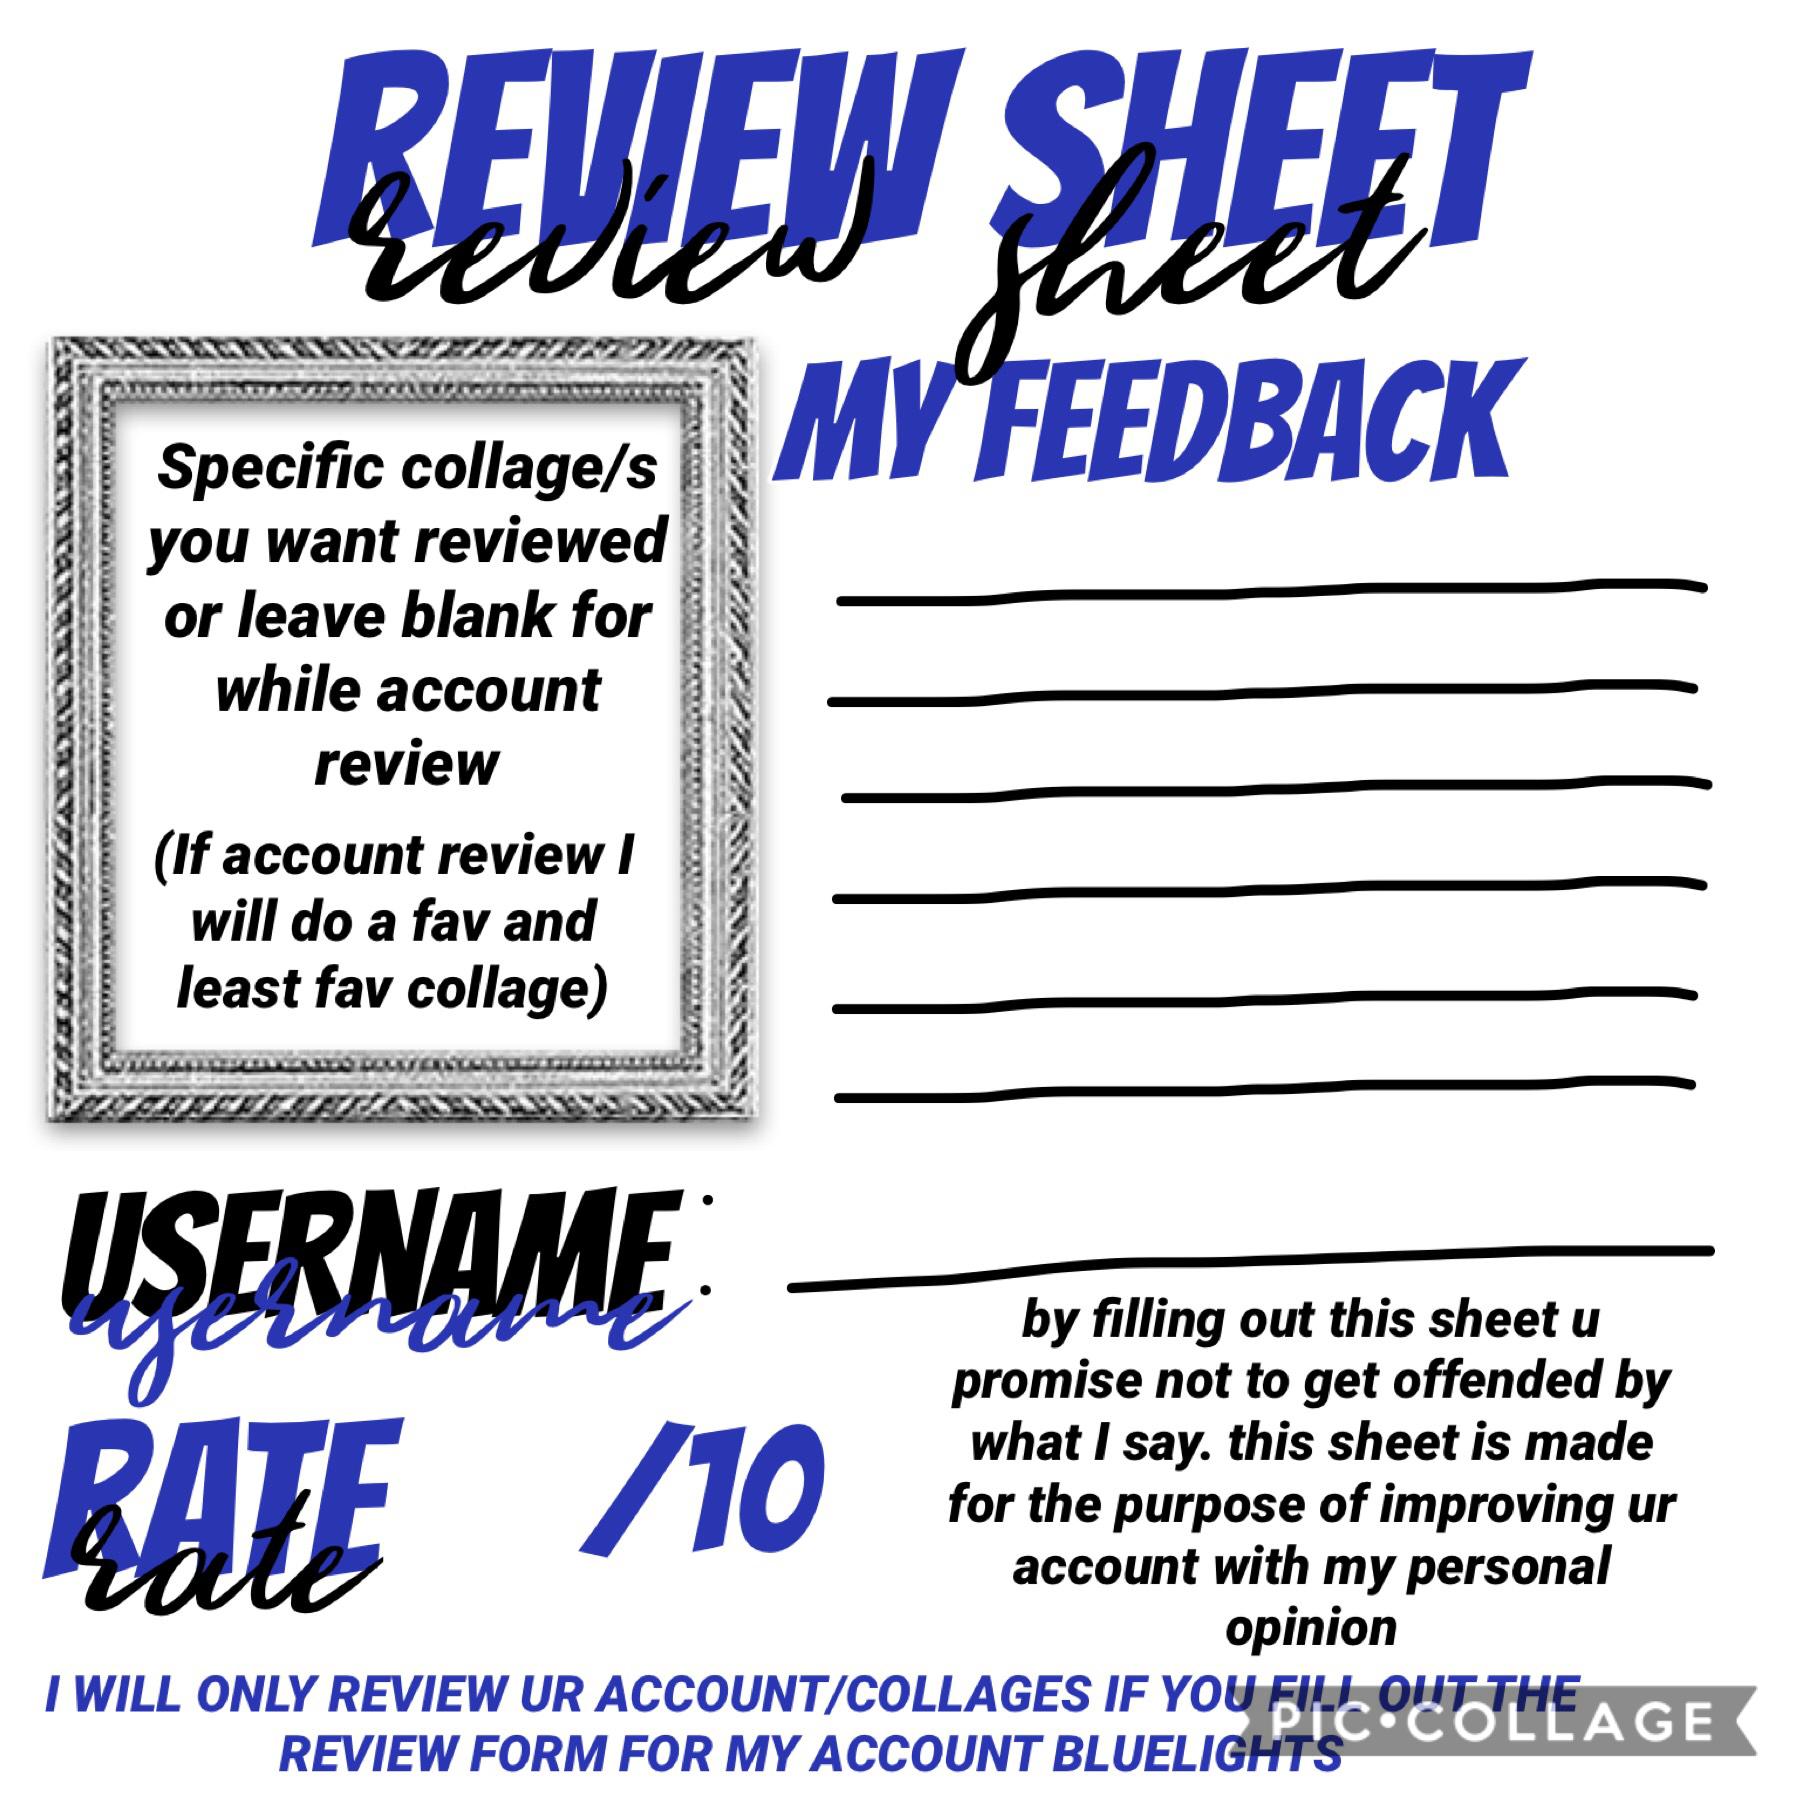 I will review ur account on the terms of u filling out the form in remixes (for my account bluelights) I will post ur review on this account and if u have any questions feel free to ask💙💙💙💙